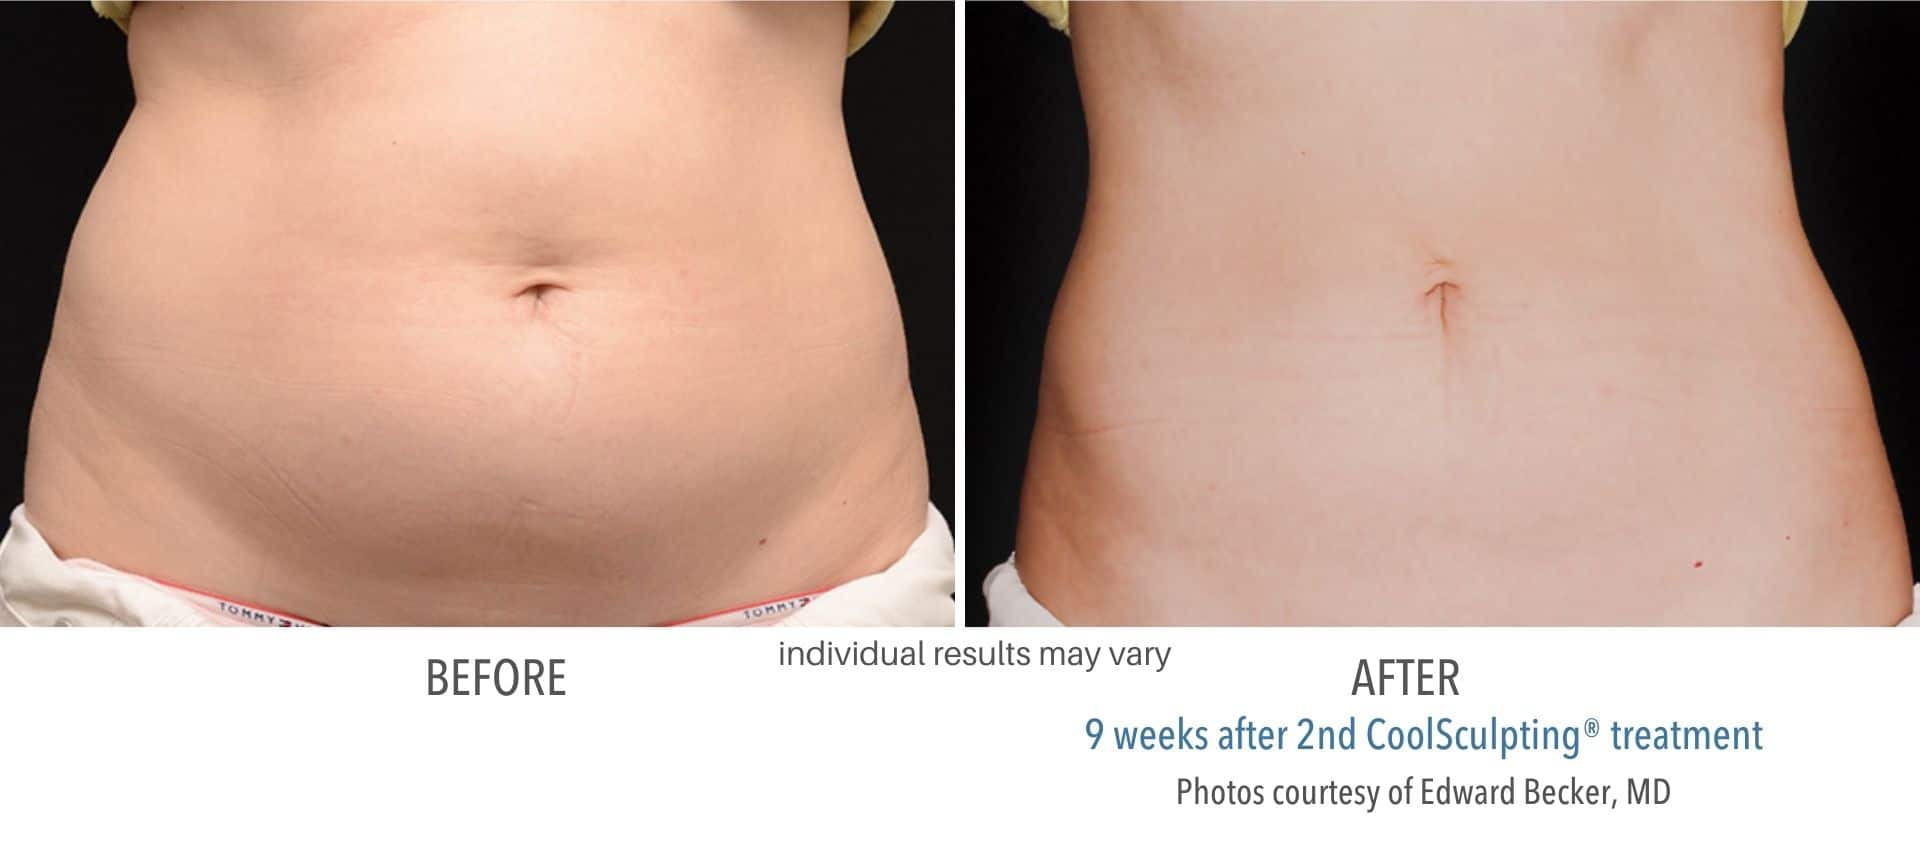 CoolSculpting belly fat treatment before and after